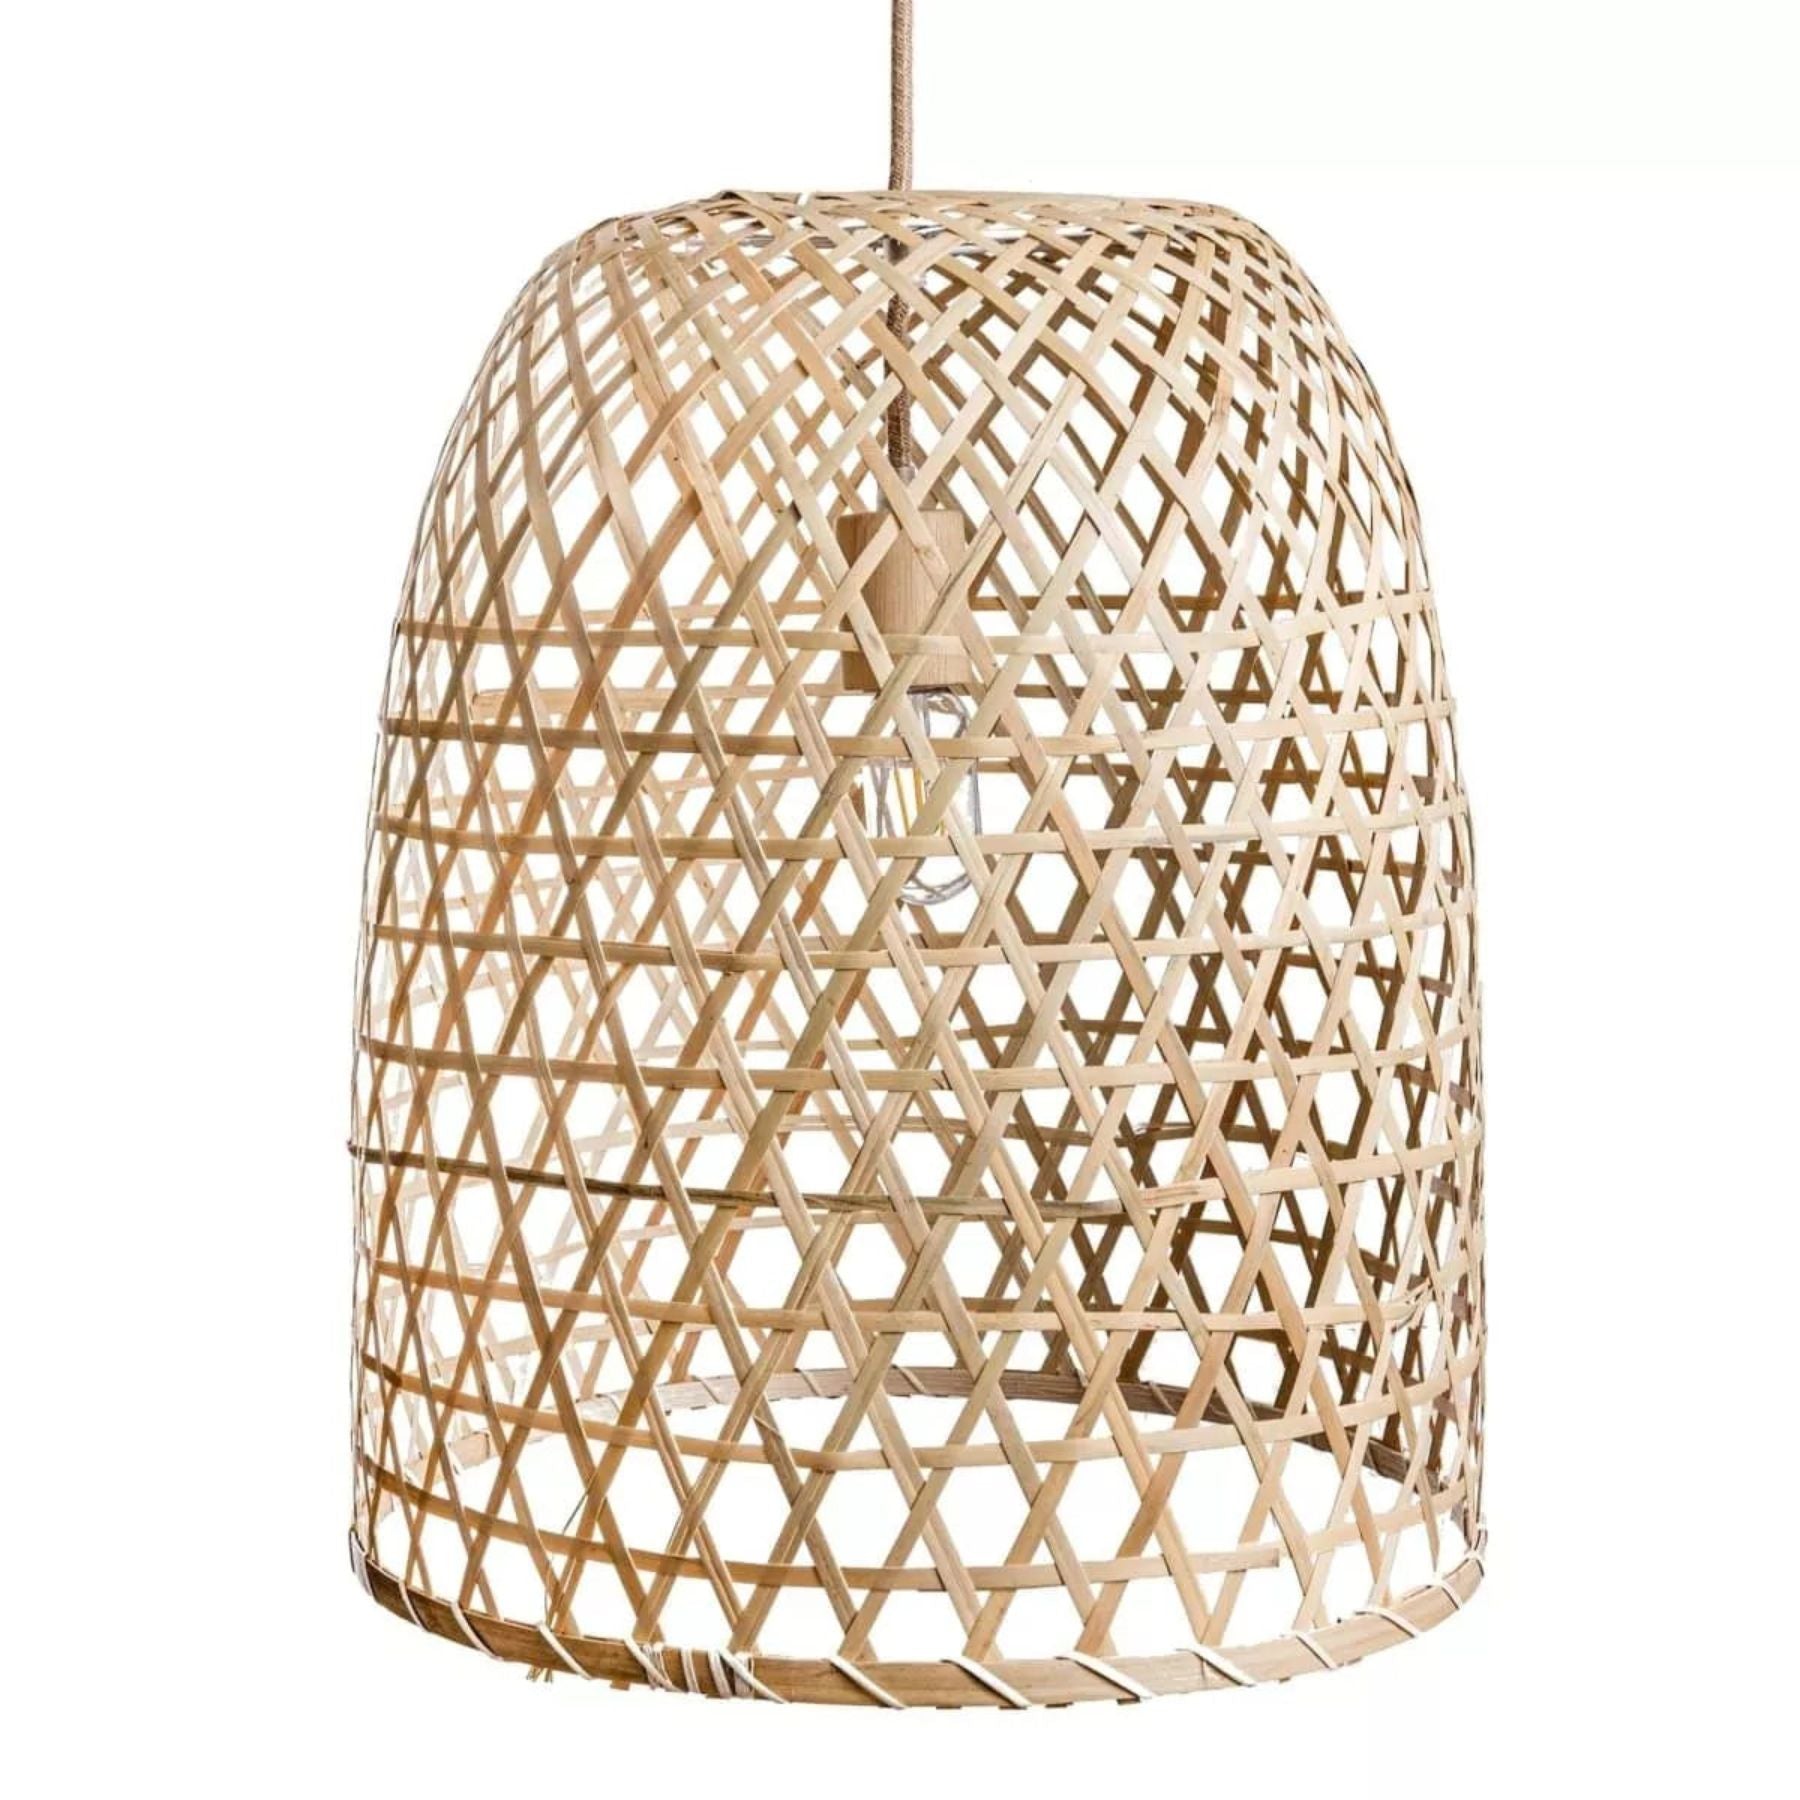 audra bamboo lanterns embody tradition woven by hand